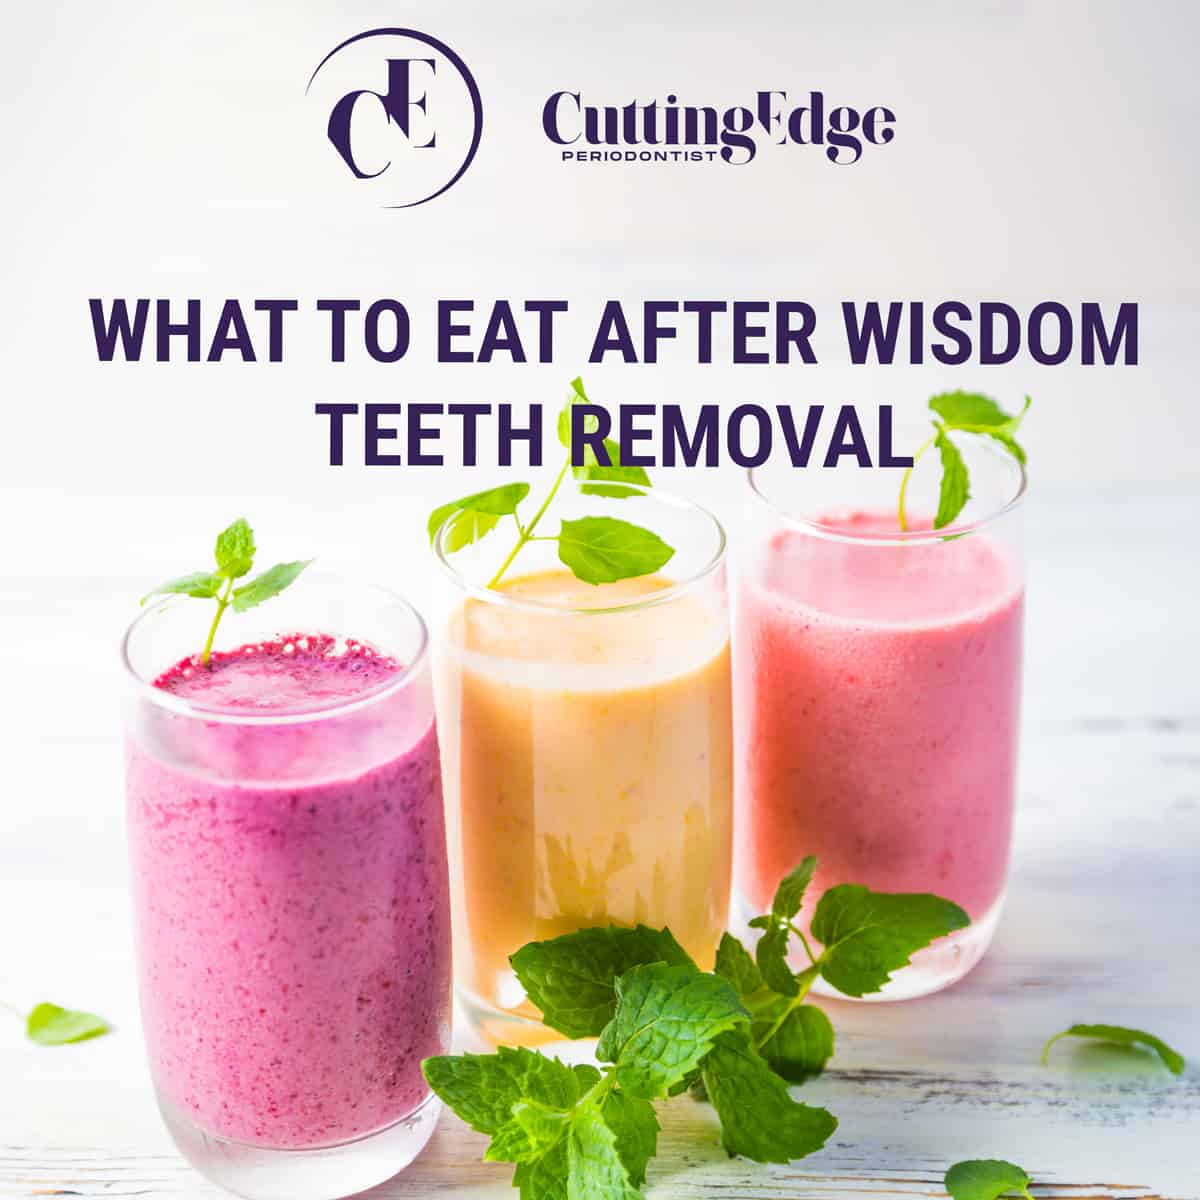 What To Eat After Wisdom Teeth Removal - Glendale, Burbank, Hollywood, Sun Valley, Sherman Oaks